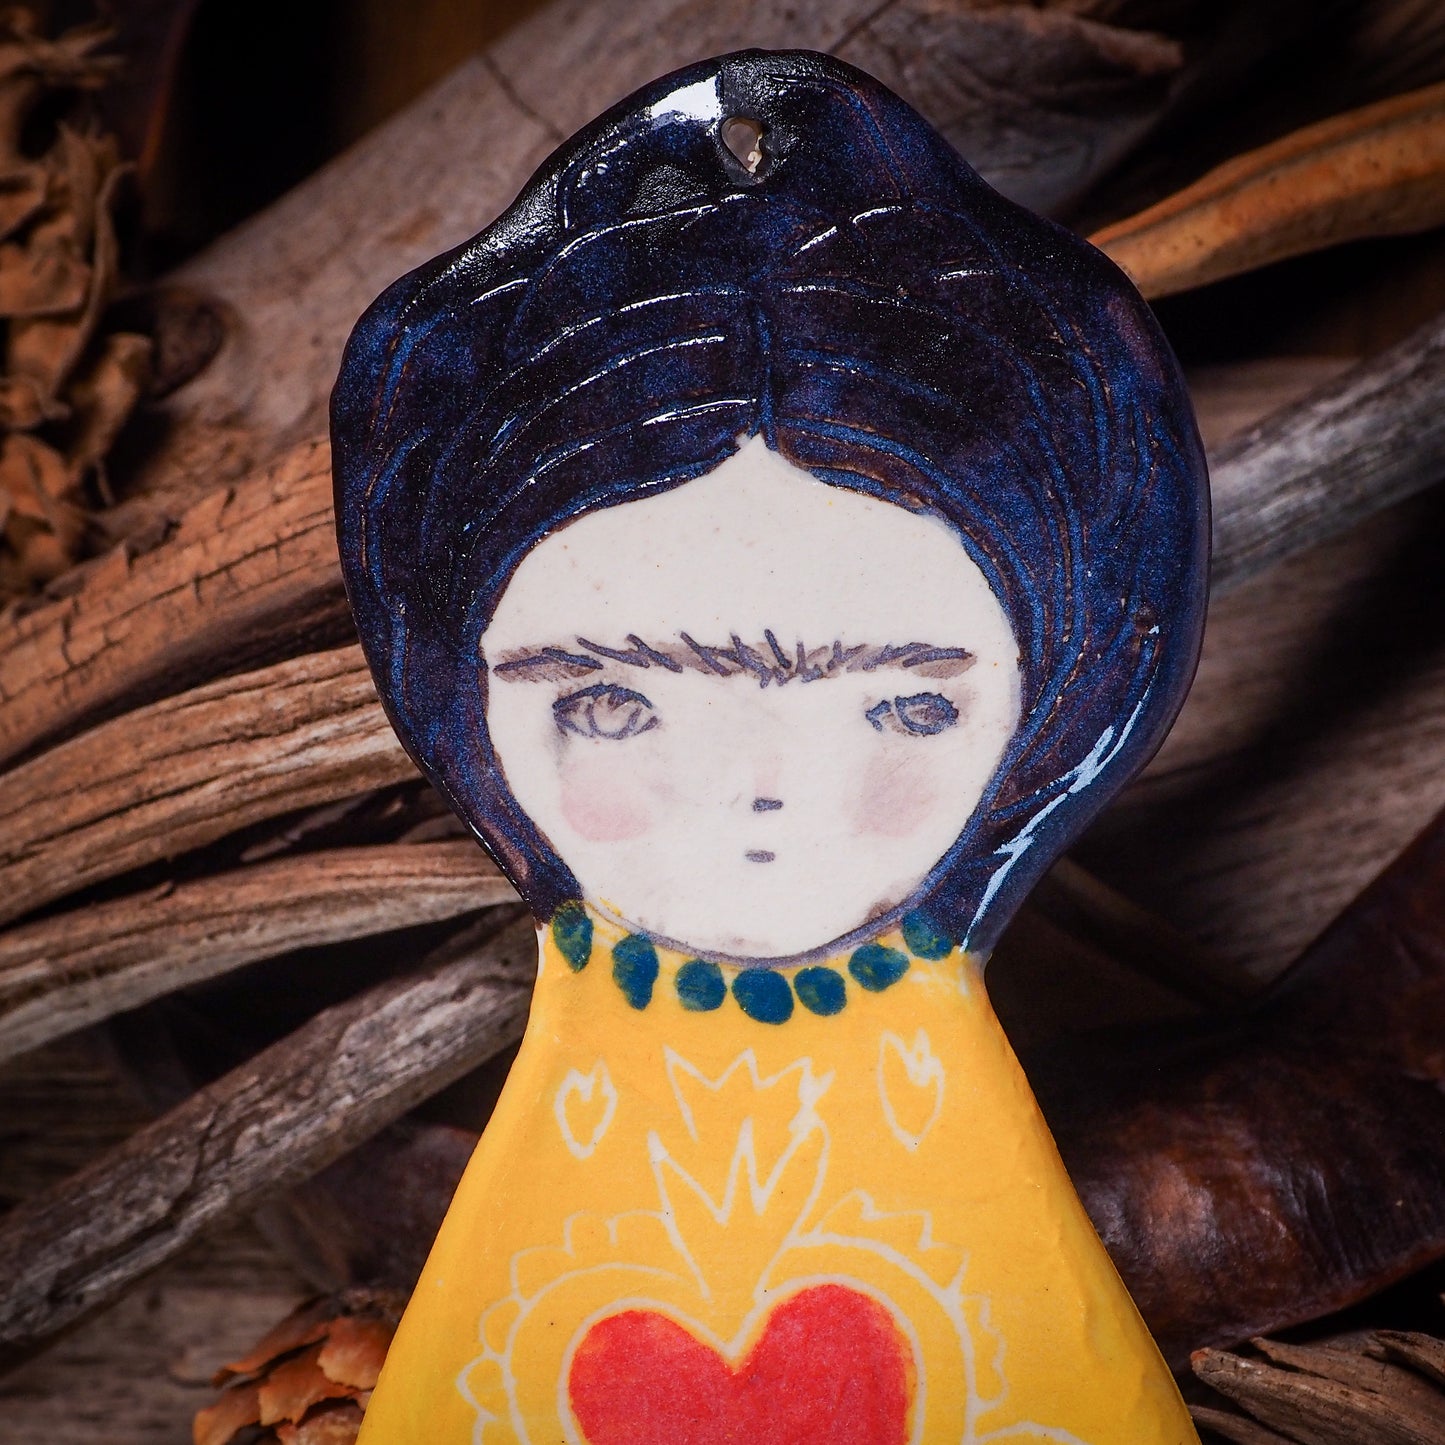 An original Christmas Holiday tree glazed ceramic ornament handmade by Idania Salcido, the artist behind Danita Art. Glazed carved sgraffito stoneware, hand painted and decorated, it is illustrated by hand with Frida Kahlo, Mexican motifs and bold, bright and colorful ceramic glazes.